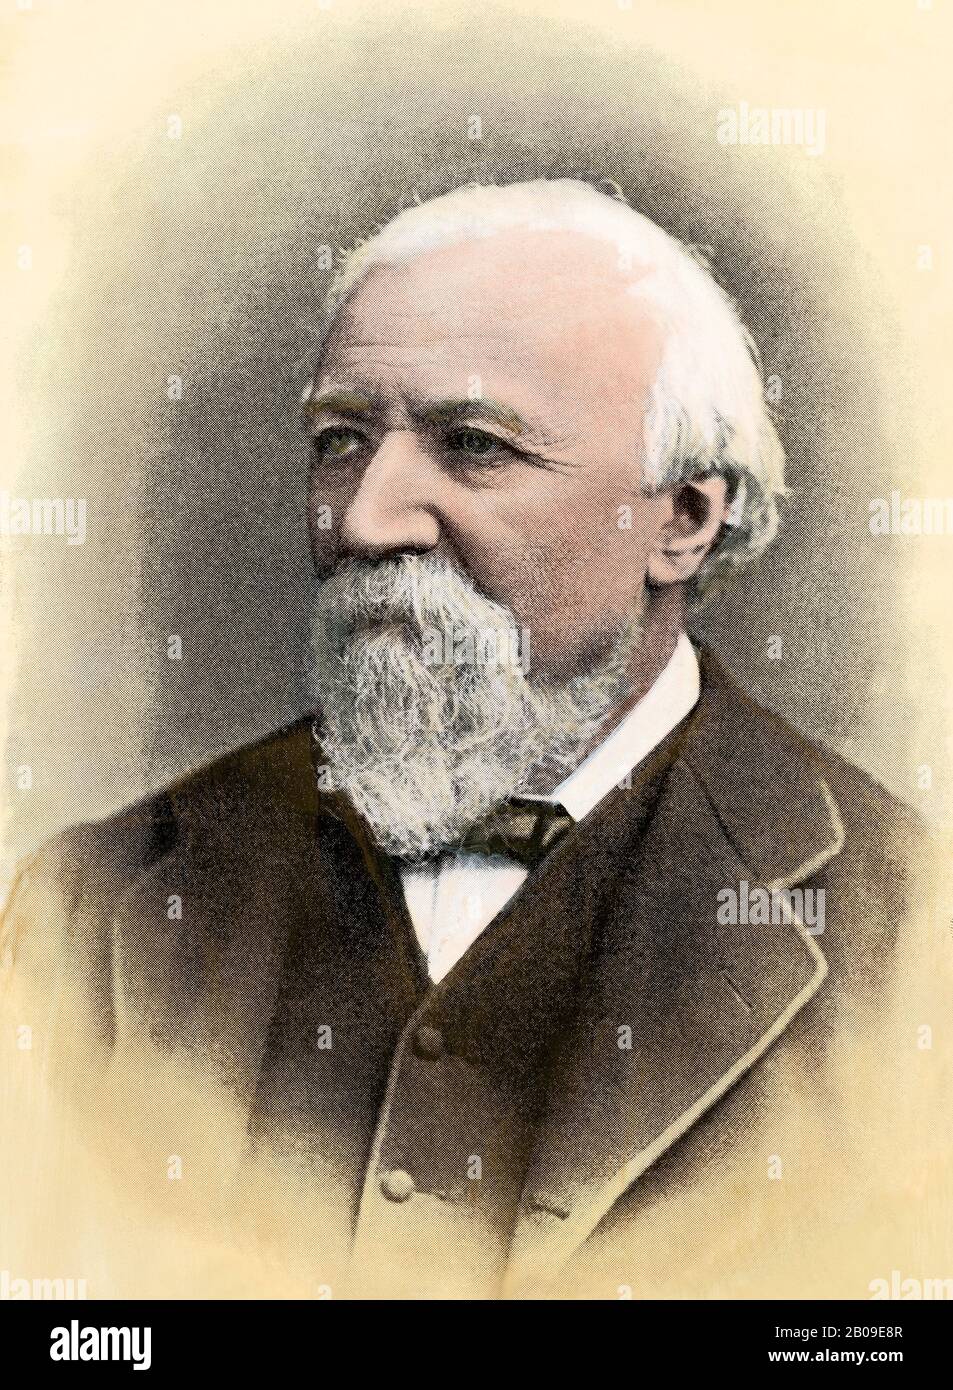 Robert Browning. Hand-colored halftone of a photograph Stock Photo